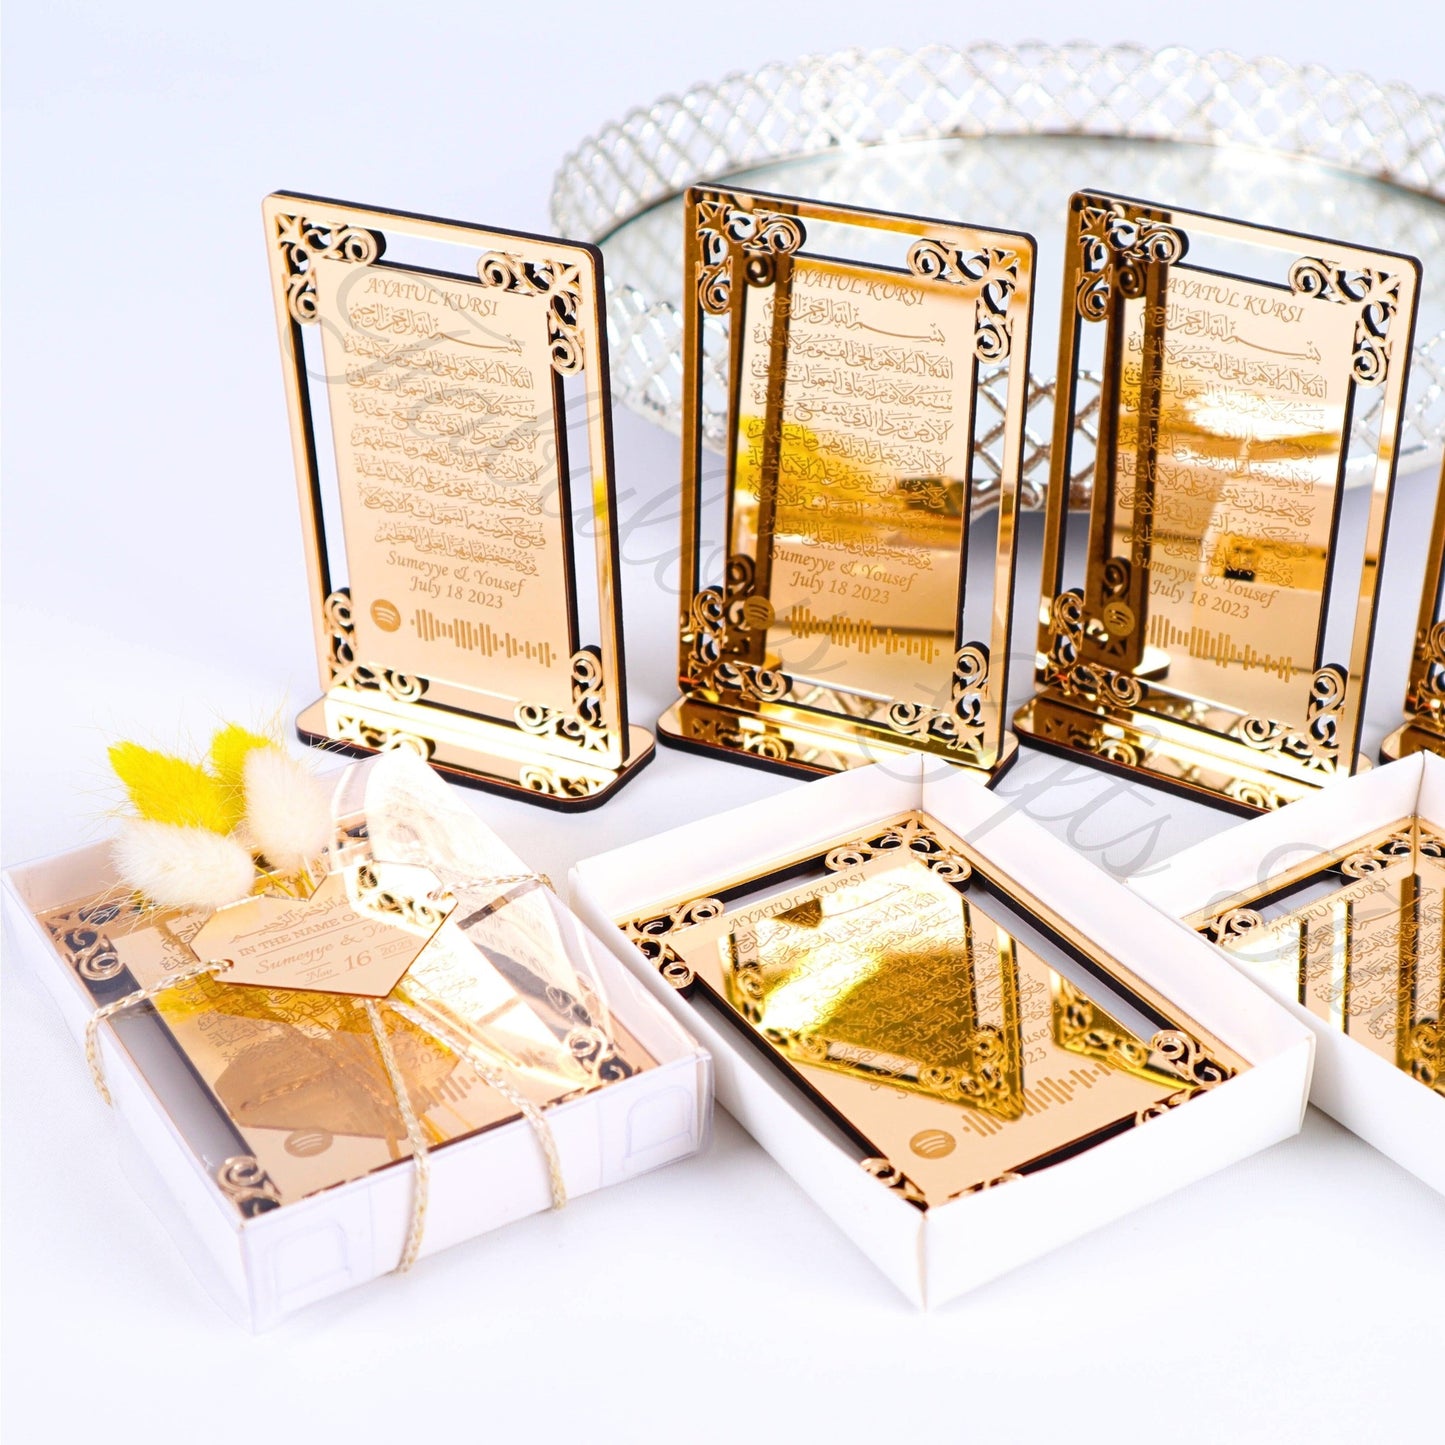 Personalized Wedding Favor Ayatul Kursi on Stand Gold Acrylic Mirror - Islamic Elite Favors is a handmade gift shop offering a wide variety of unique and personalized gifts for all occasions. Whether you're looking for the perfect Ramadan, Eid, Hajj, wedding gift or something special for a birthday, baby shower or anniversary, we have something for everyone. High quality, made with love.